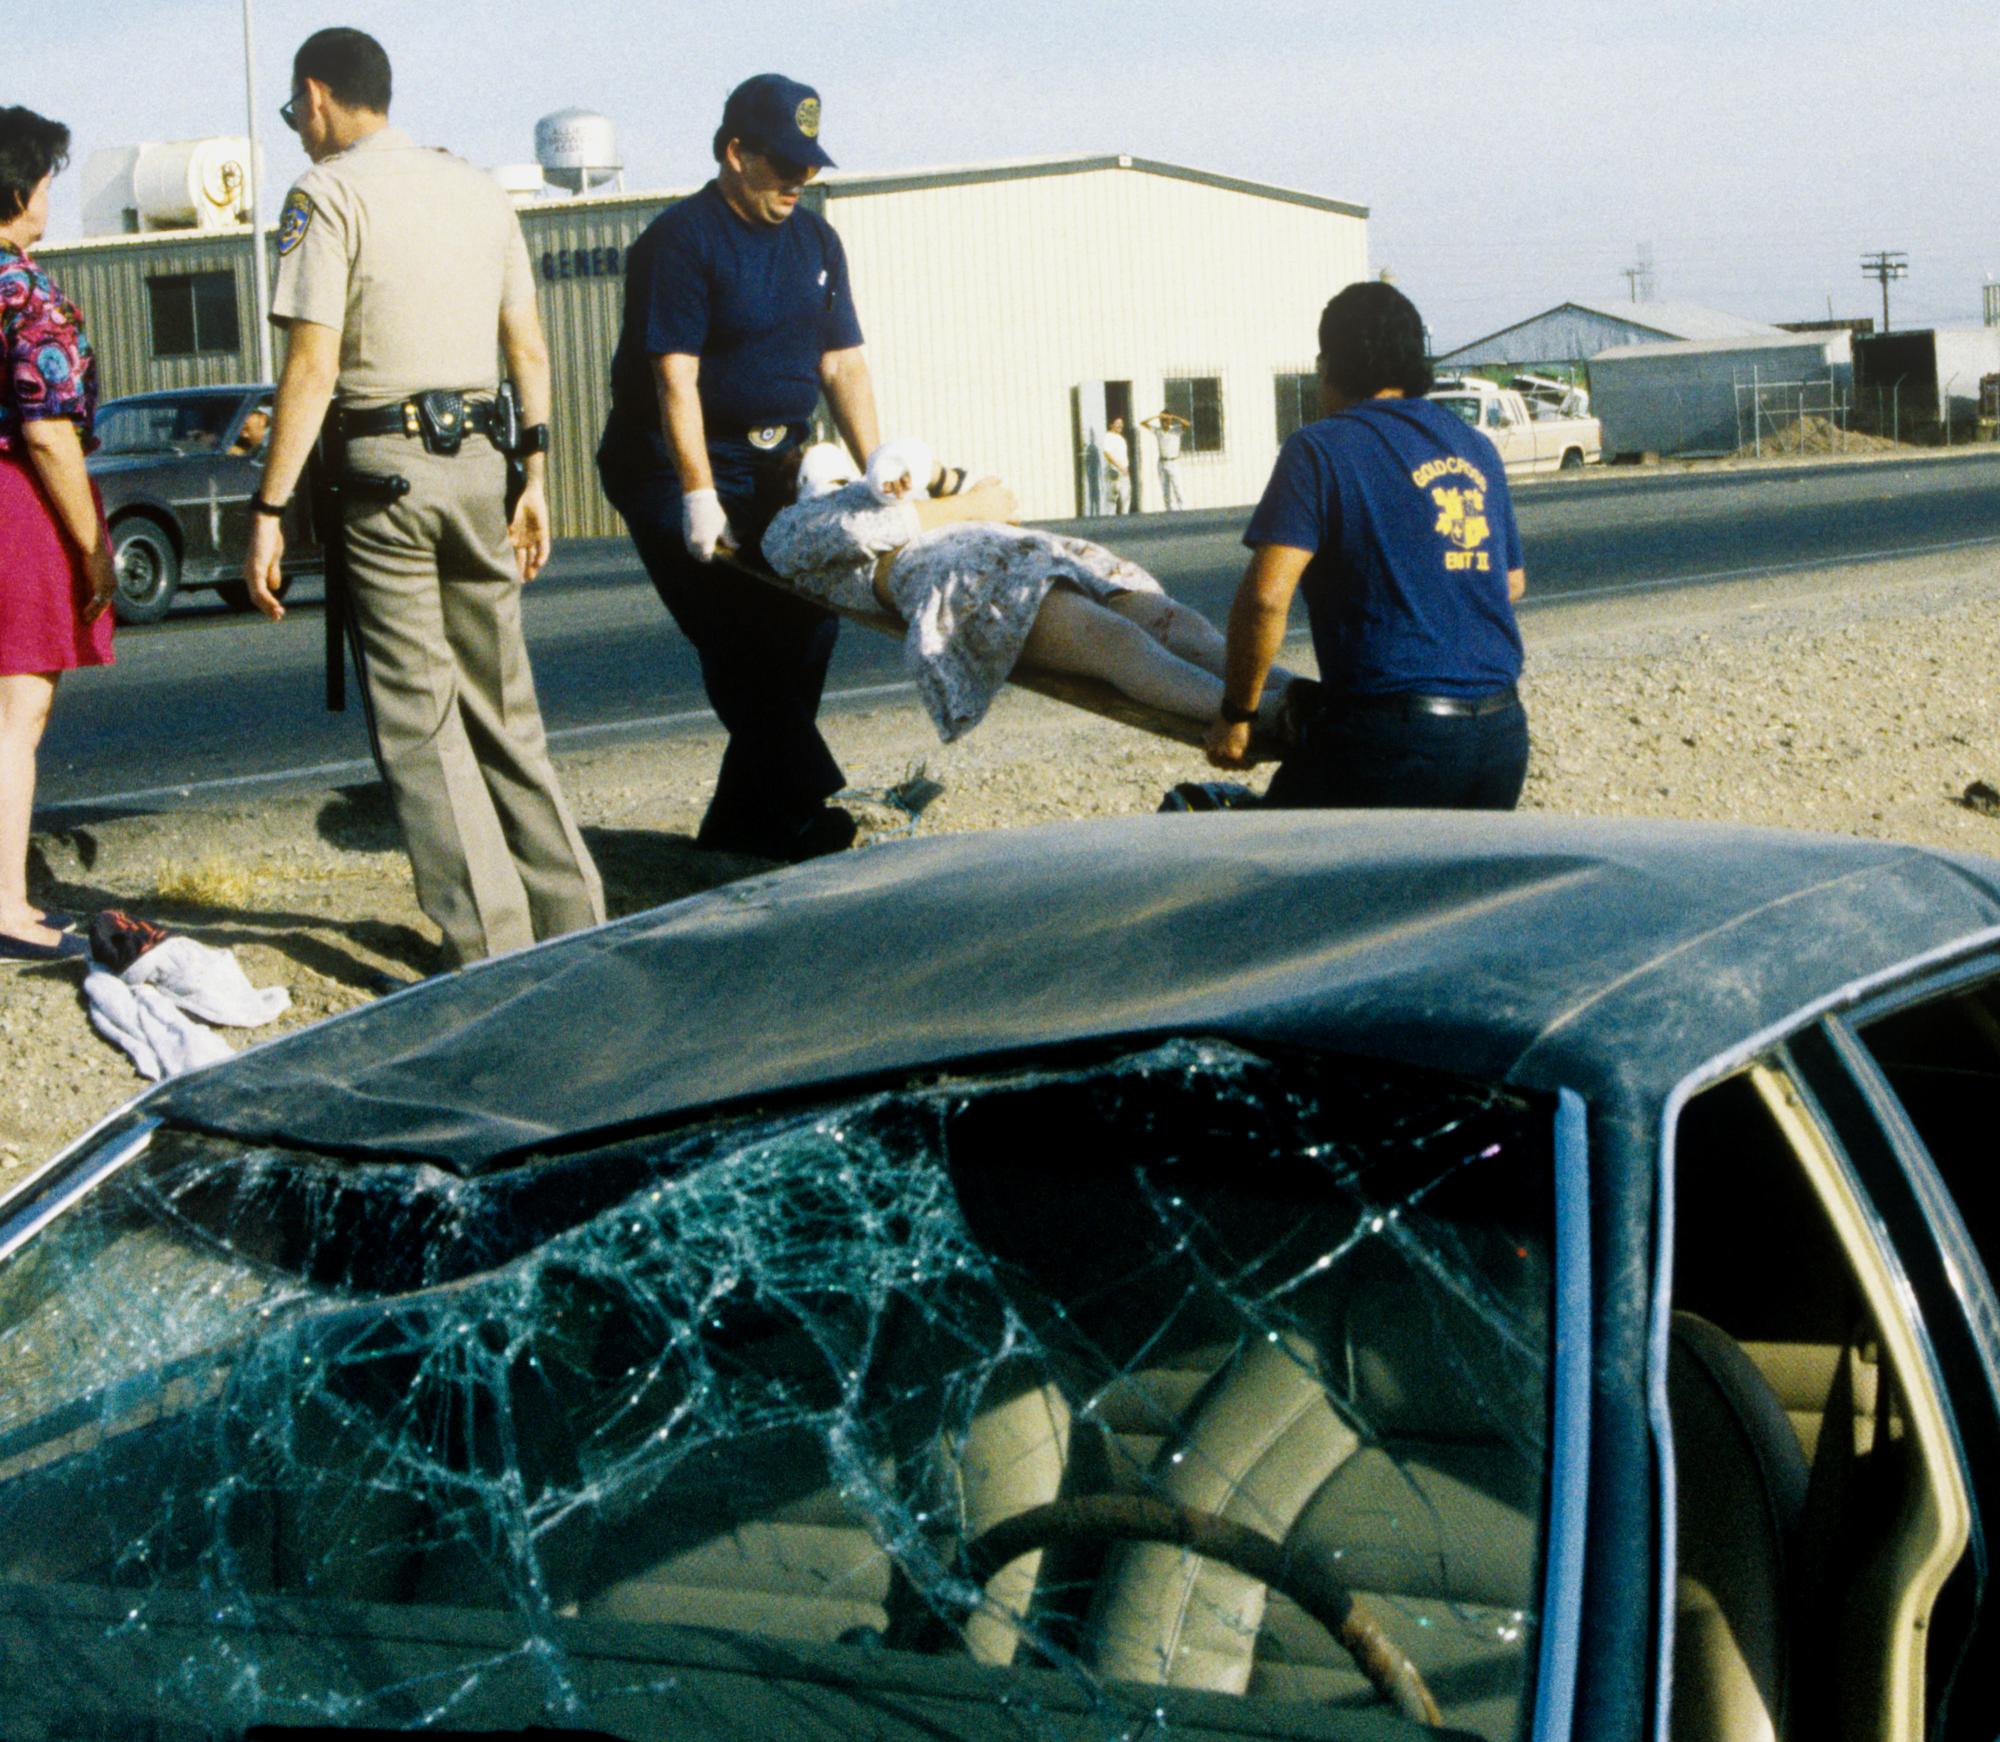 Imperial Valley Press (1992) - Accident #1